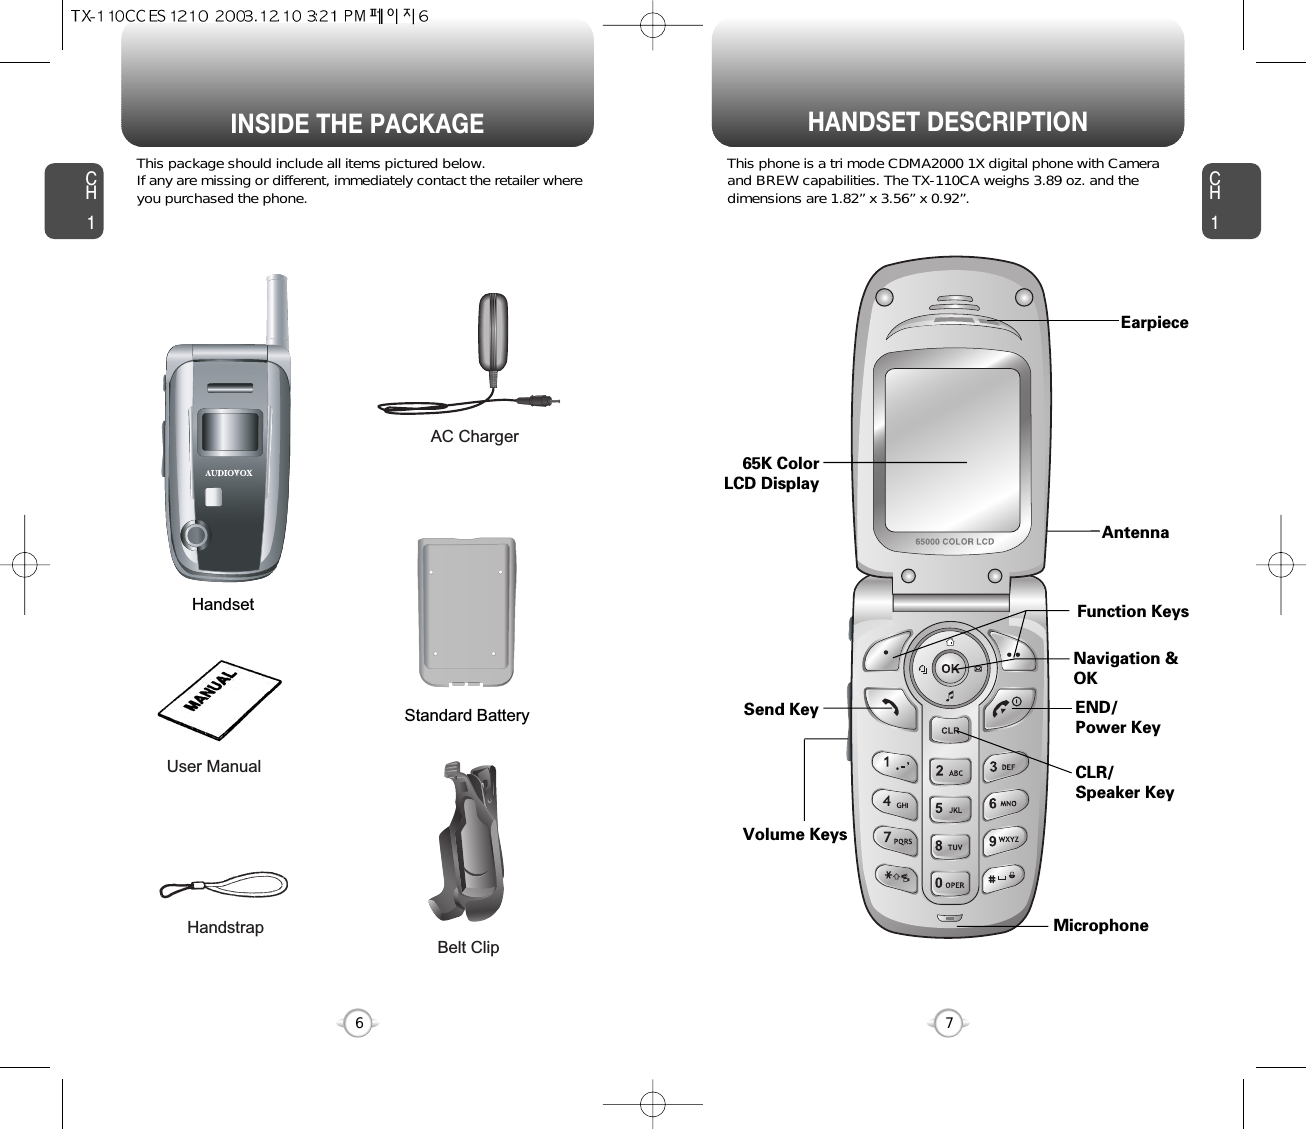 HANDSET DESCRIPTIONCH1This package should include all items pictured below. If any are missing or different, immediately contact the retailer whereyou purchased the phone.7INSIDE THE PACKAGECH16This phone is a tri mode CDMA2000 1X digital phone with Cameraand BREW capabilities. The TX-110CA weighs 3.89 oz. and thedimensions are 1.82” x 3.56” x 0.92”.AntennaVolume Keys65K ColorLCD DisplayFunction KeysSend Key END/Power KeyMicrophoneEarpieceCLR/Speaker KeyNavigation &amp;OKBelt ClipUser ManualAC ChargerHandstrapHandsetStandard Battery